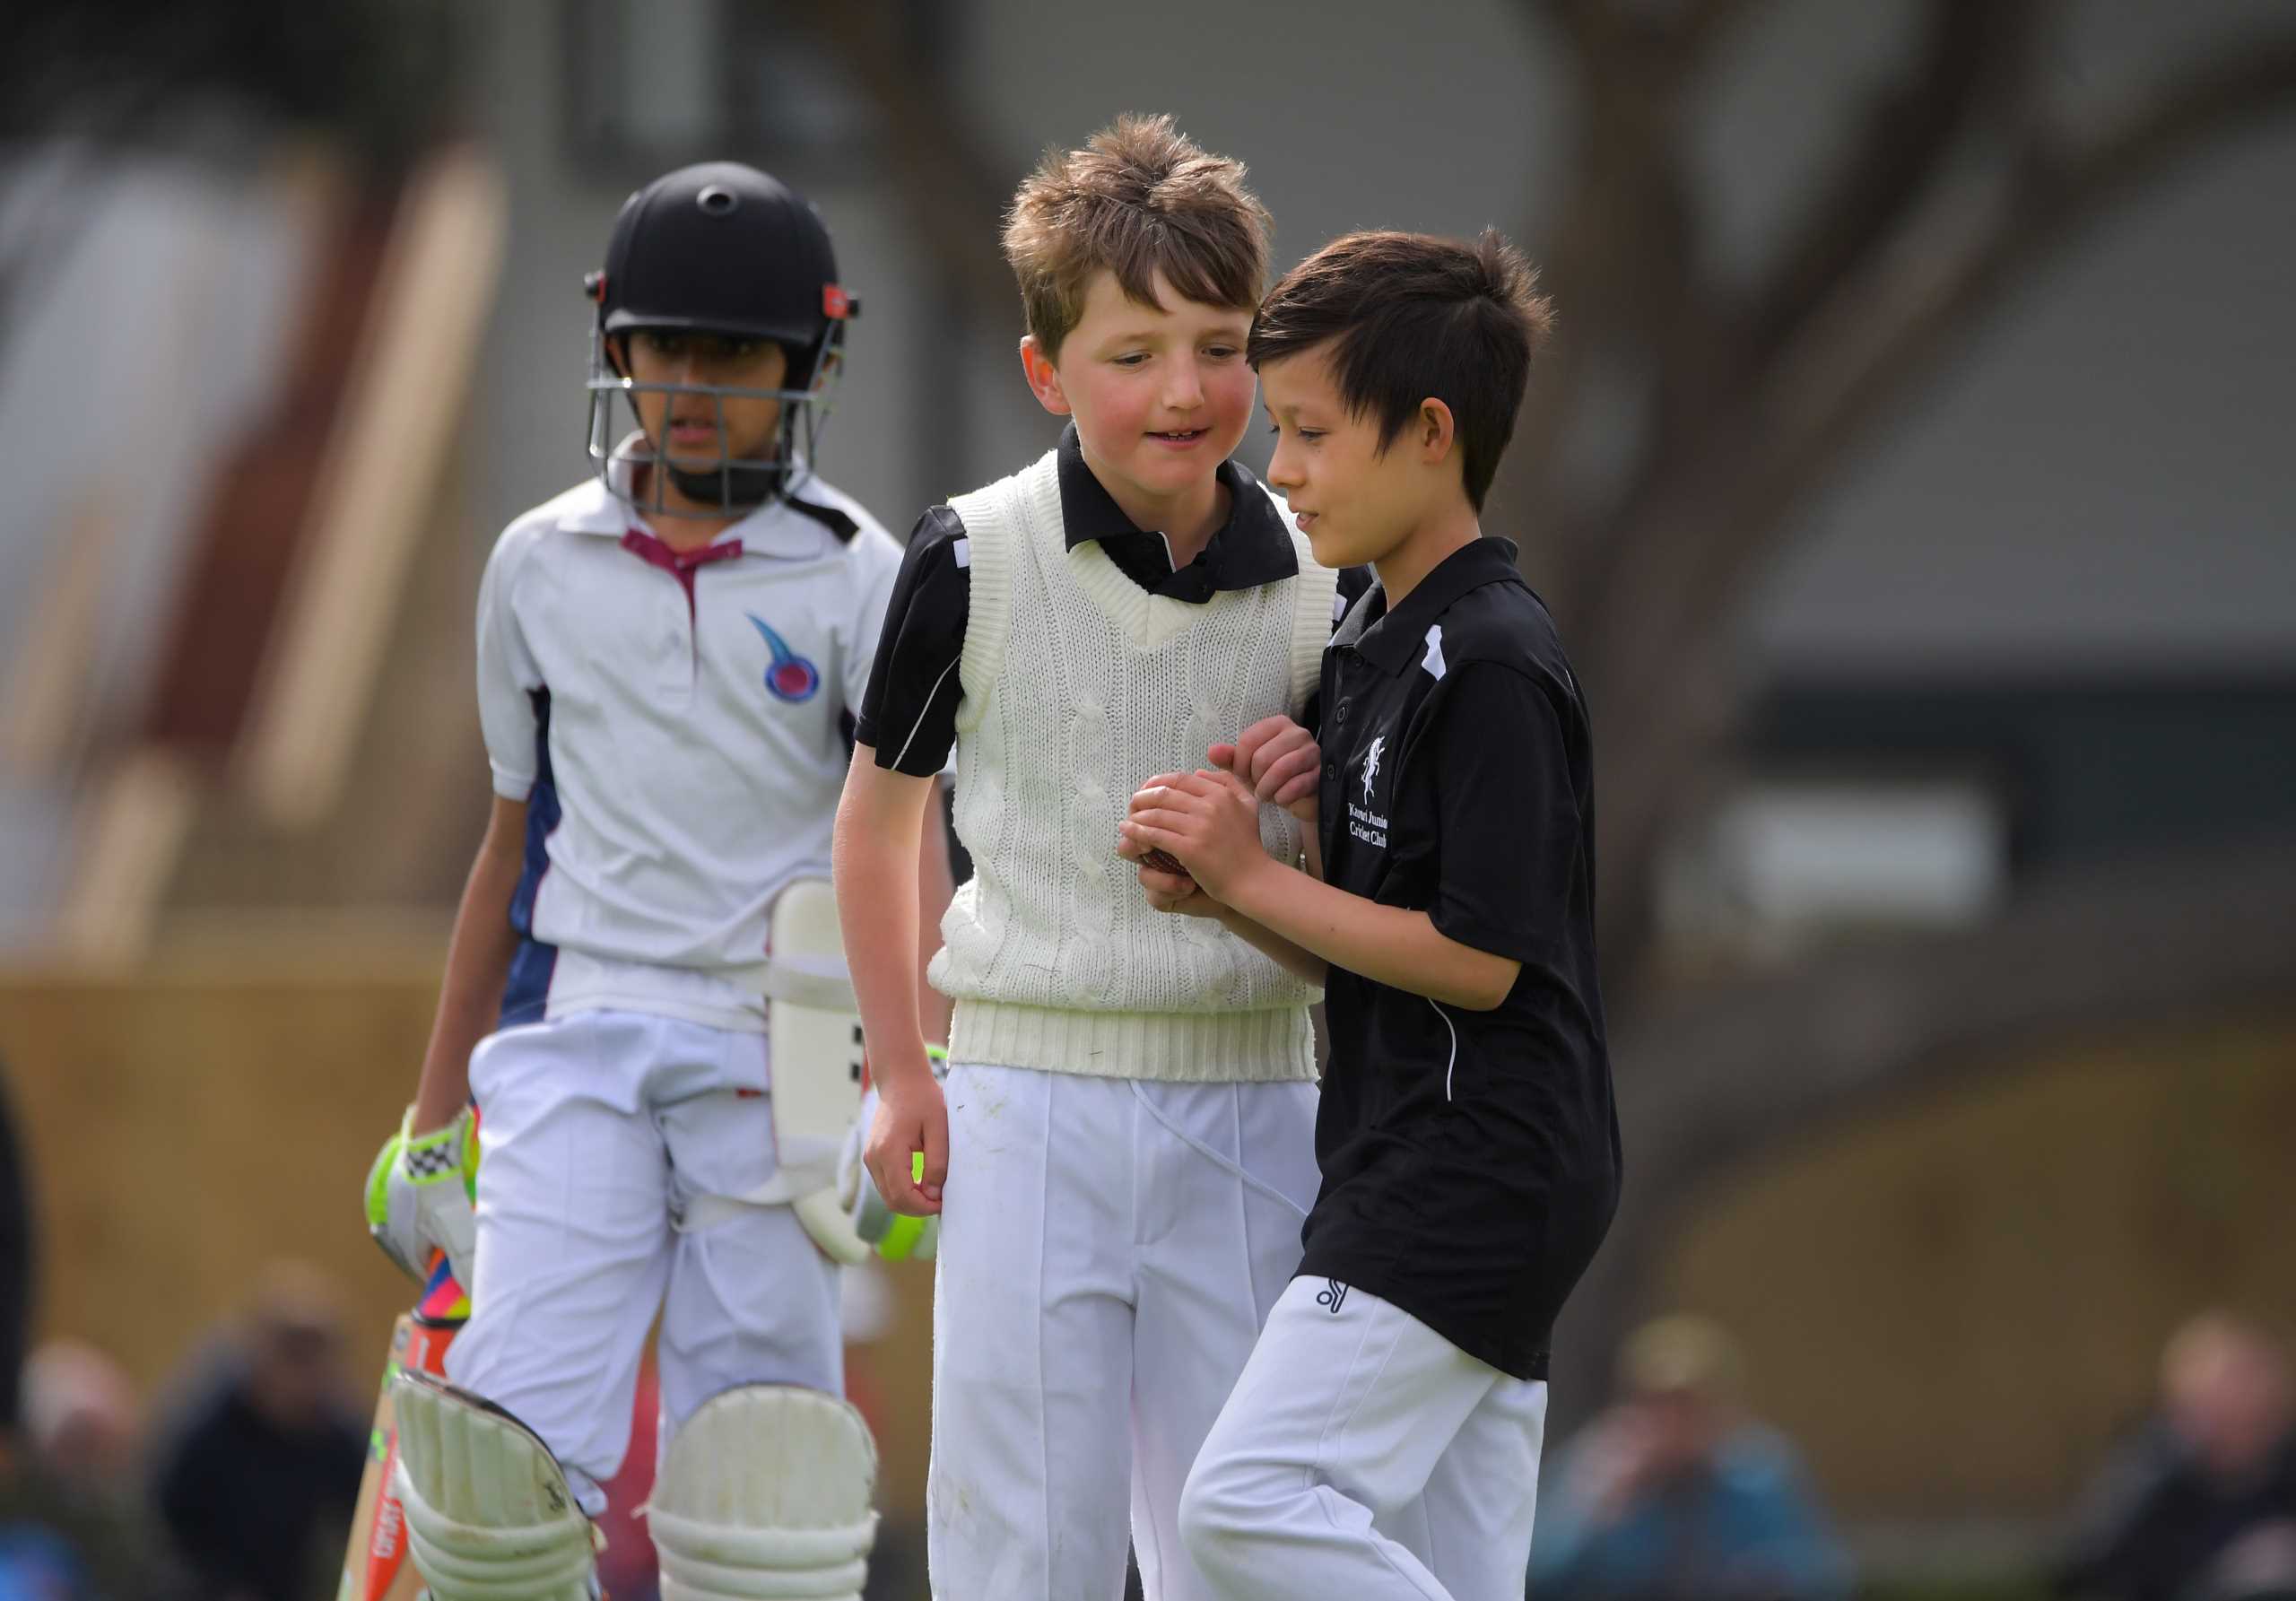 Action from the Wellington junior cricket year 7 match between Karori Tuis and Eastern Suburbs Moreporks at Miramar Park in Wellington, New Zealand on Saturday, 21 November 2020. Photo: Dave Lintott / lintottphoto.co.nz